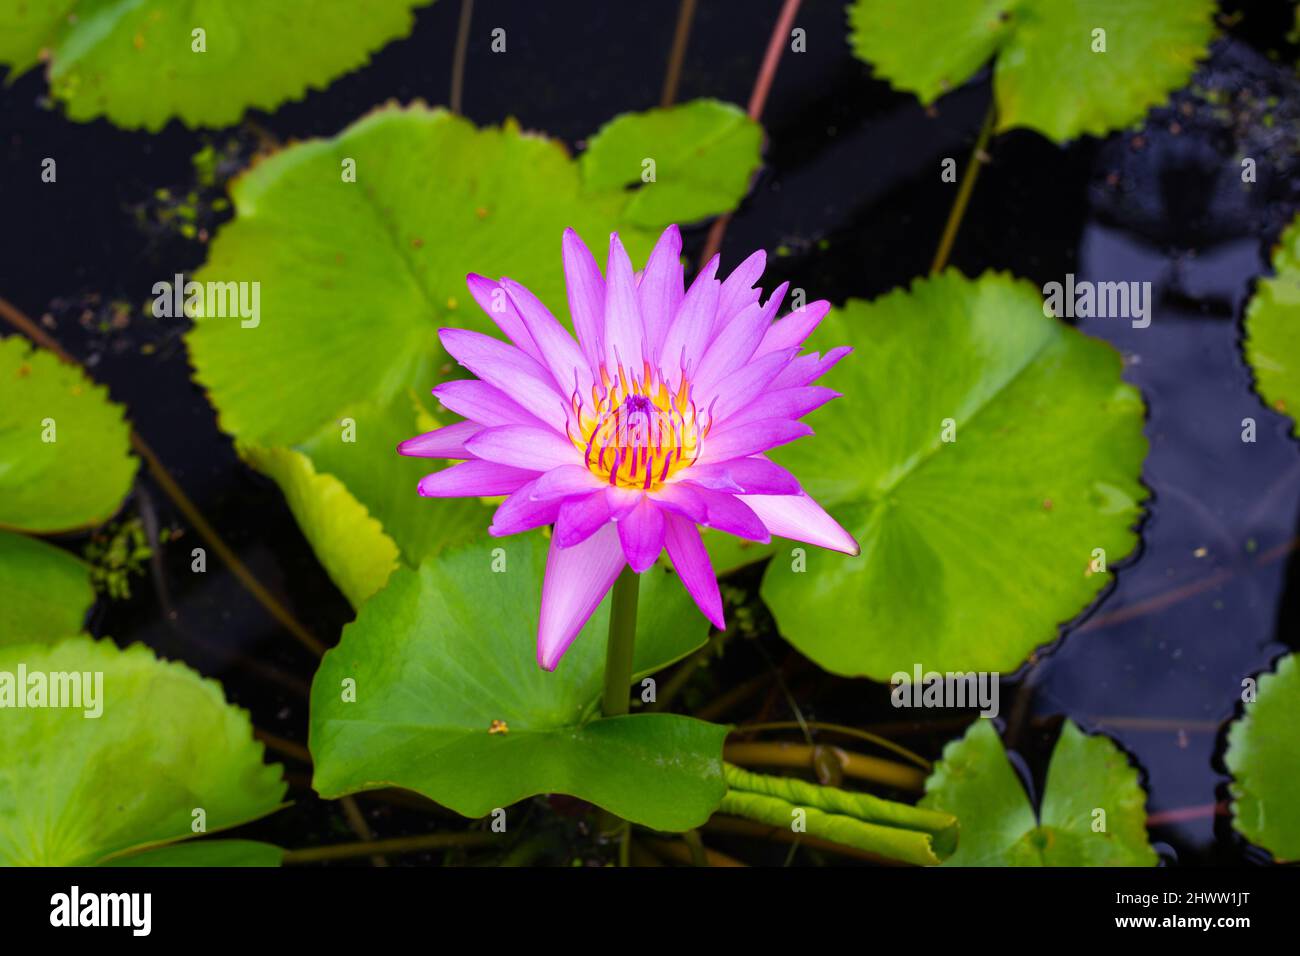 Lilac water lily flower in water with green leaves. Beauty in nature. A symbol of purity and balance. Stock Photo